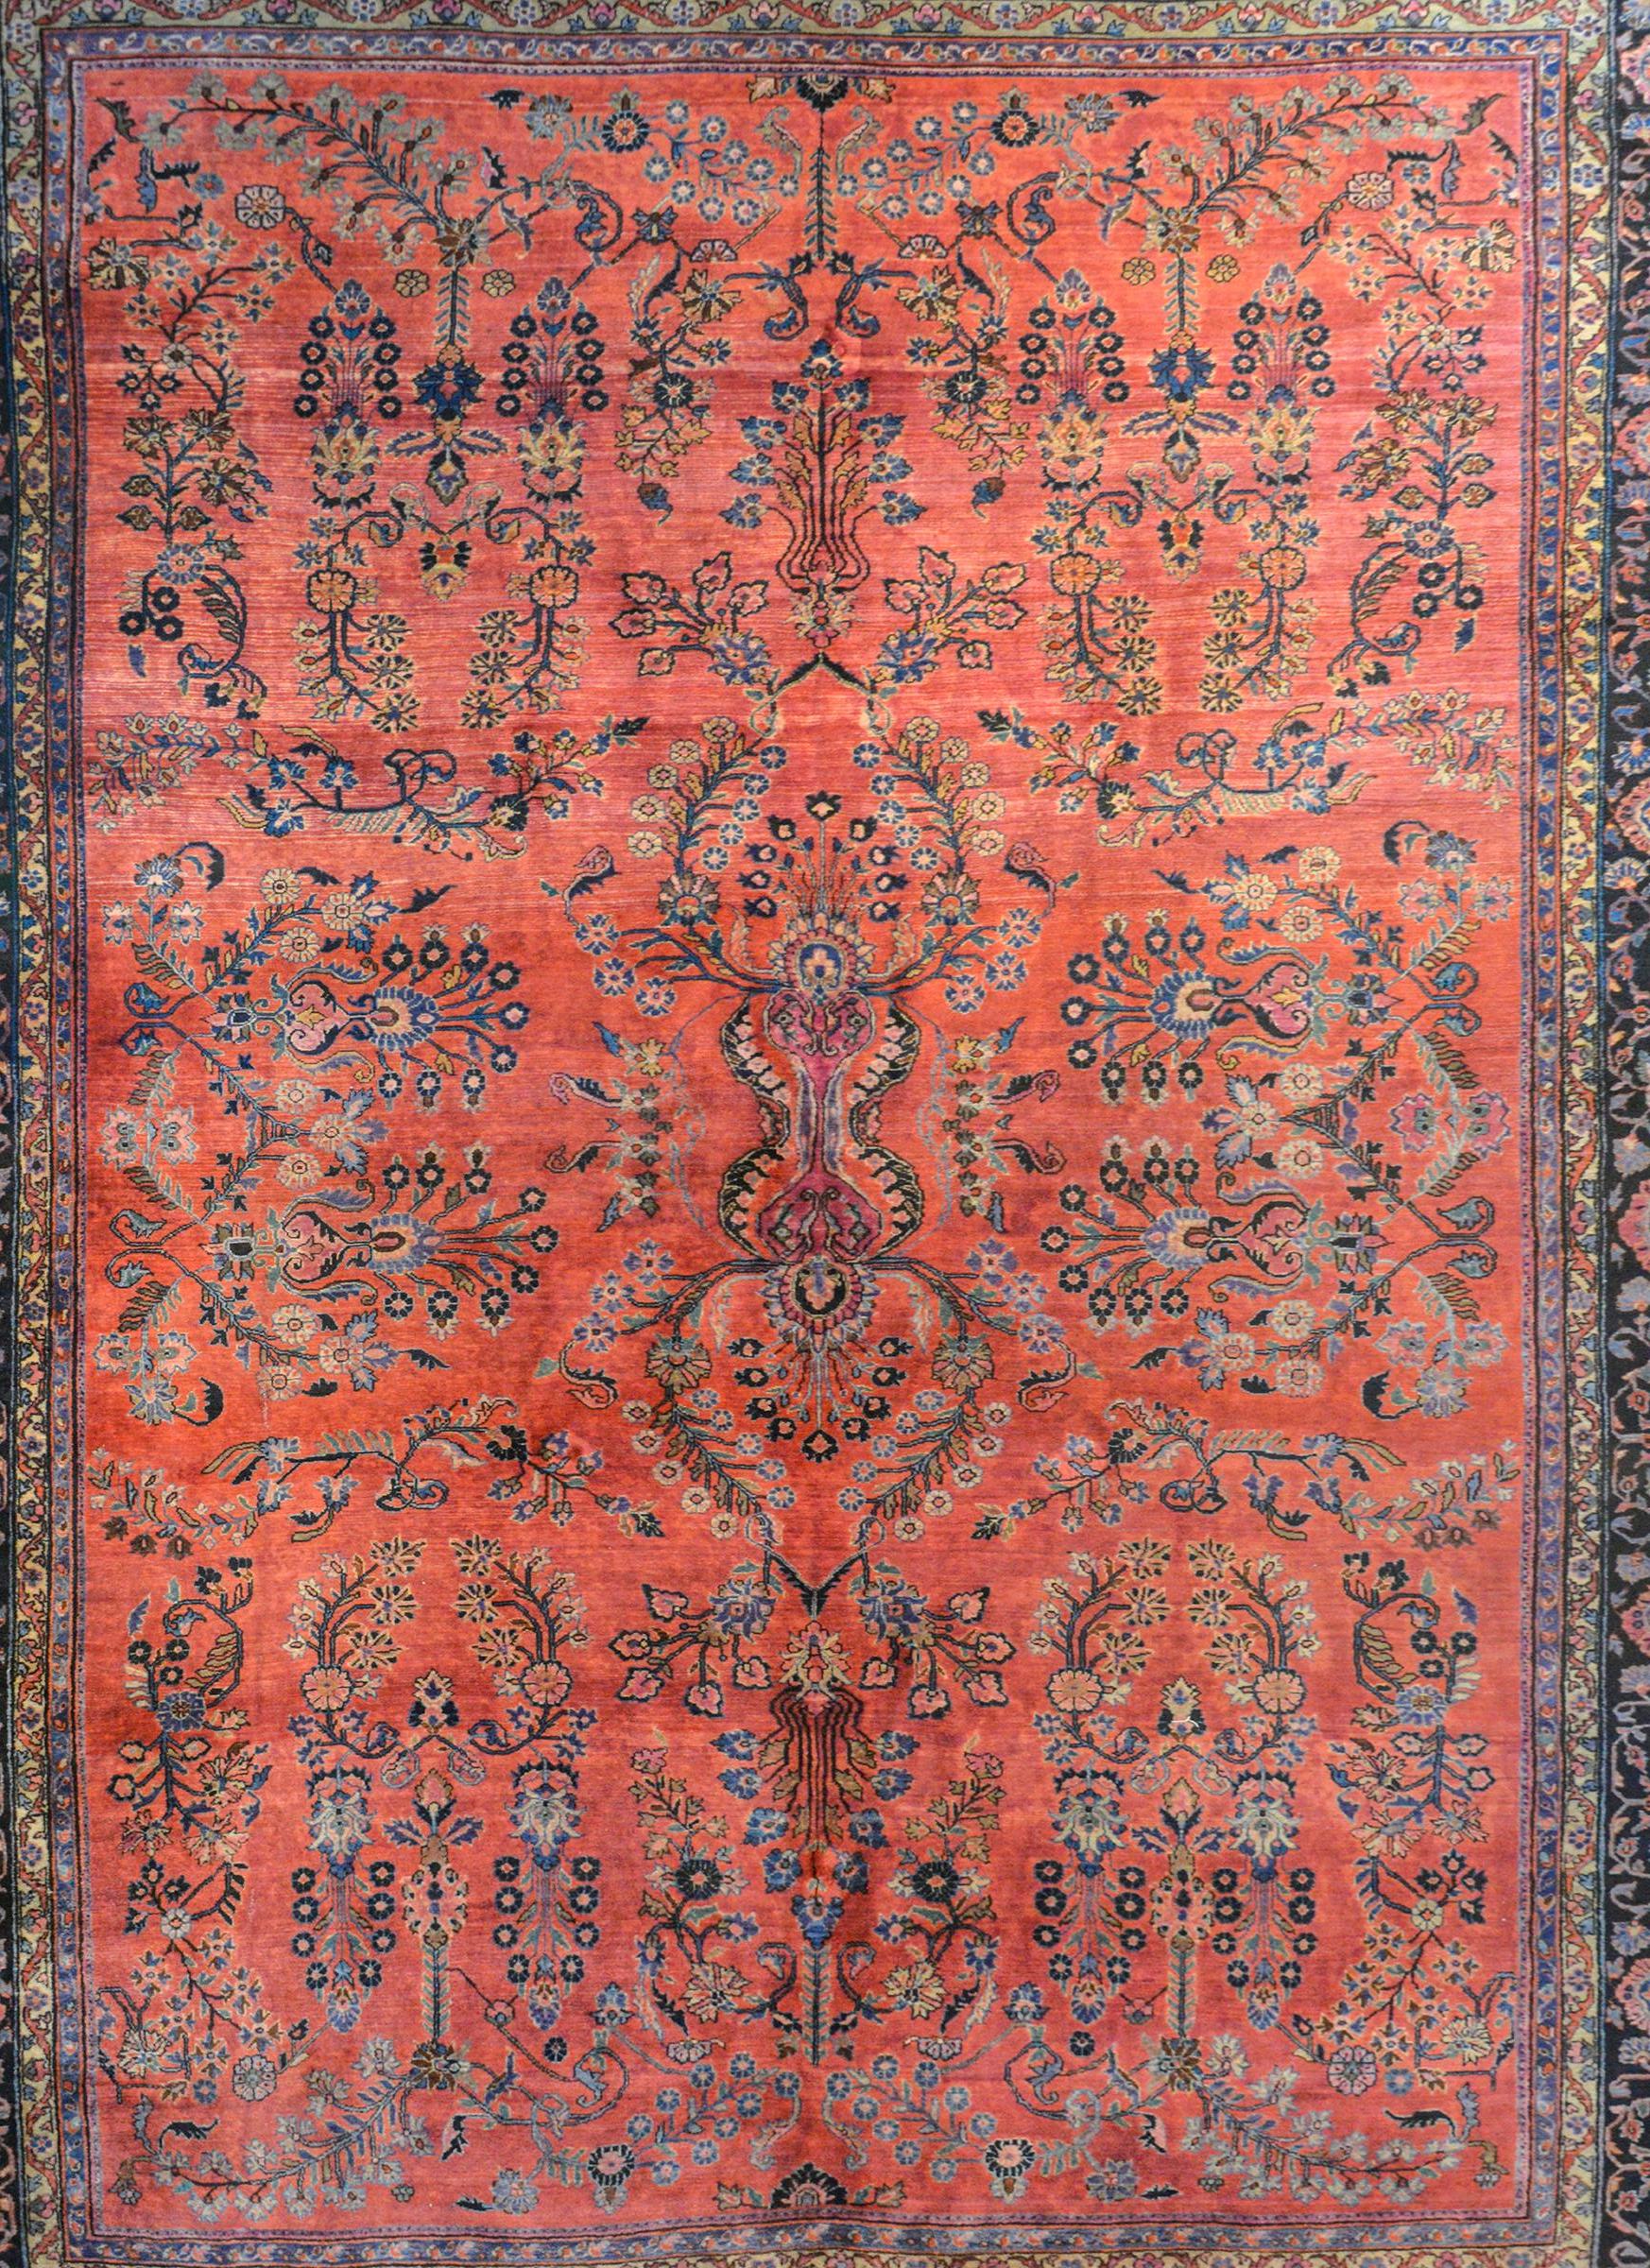 A wonderful early 20th century Persian Sarouk Mahajeran rug with a wonderful all-over mirrored floral pattern woven in light and dark indigo, cream, and pink on a rich coral background. The border is exquisite with a beautifully scrolled floral and